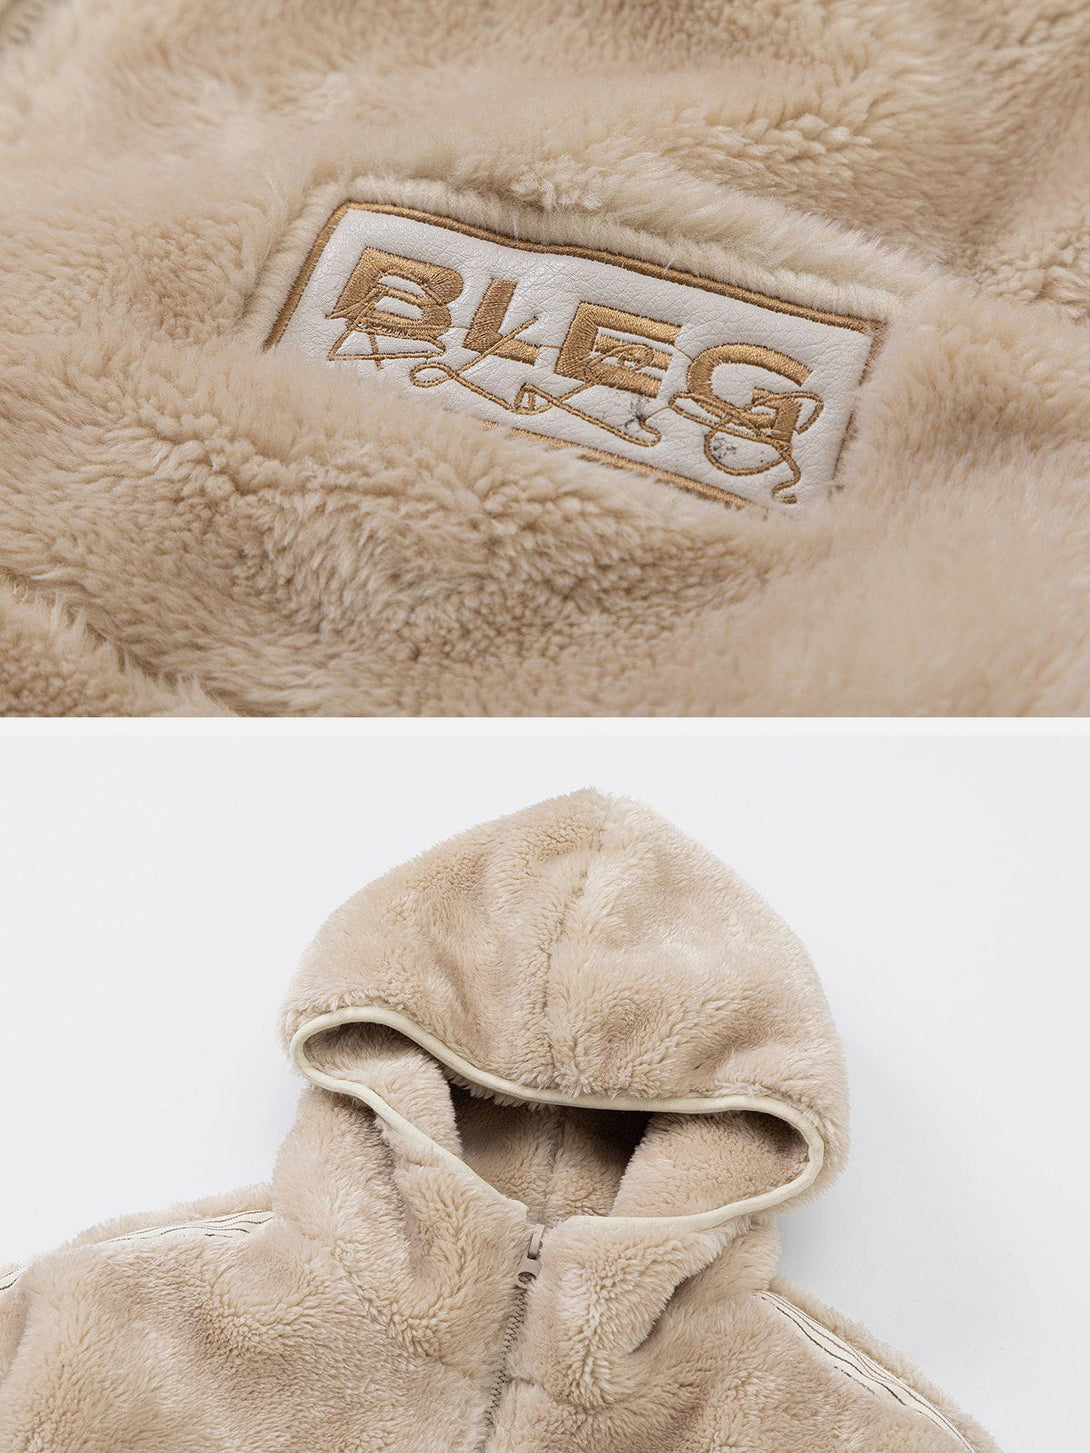 Majesda® - Embroidered Letter Hat Sherpa Coat outfit ideas, streetwear fashion - majesda.com